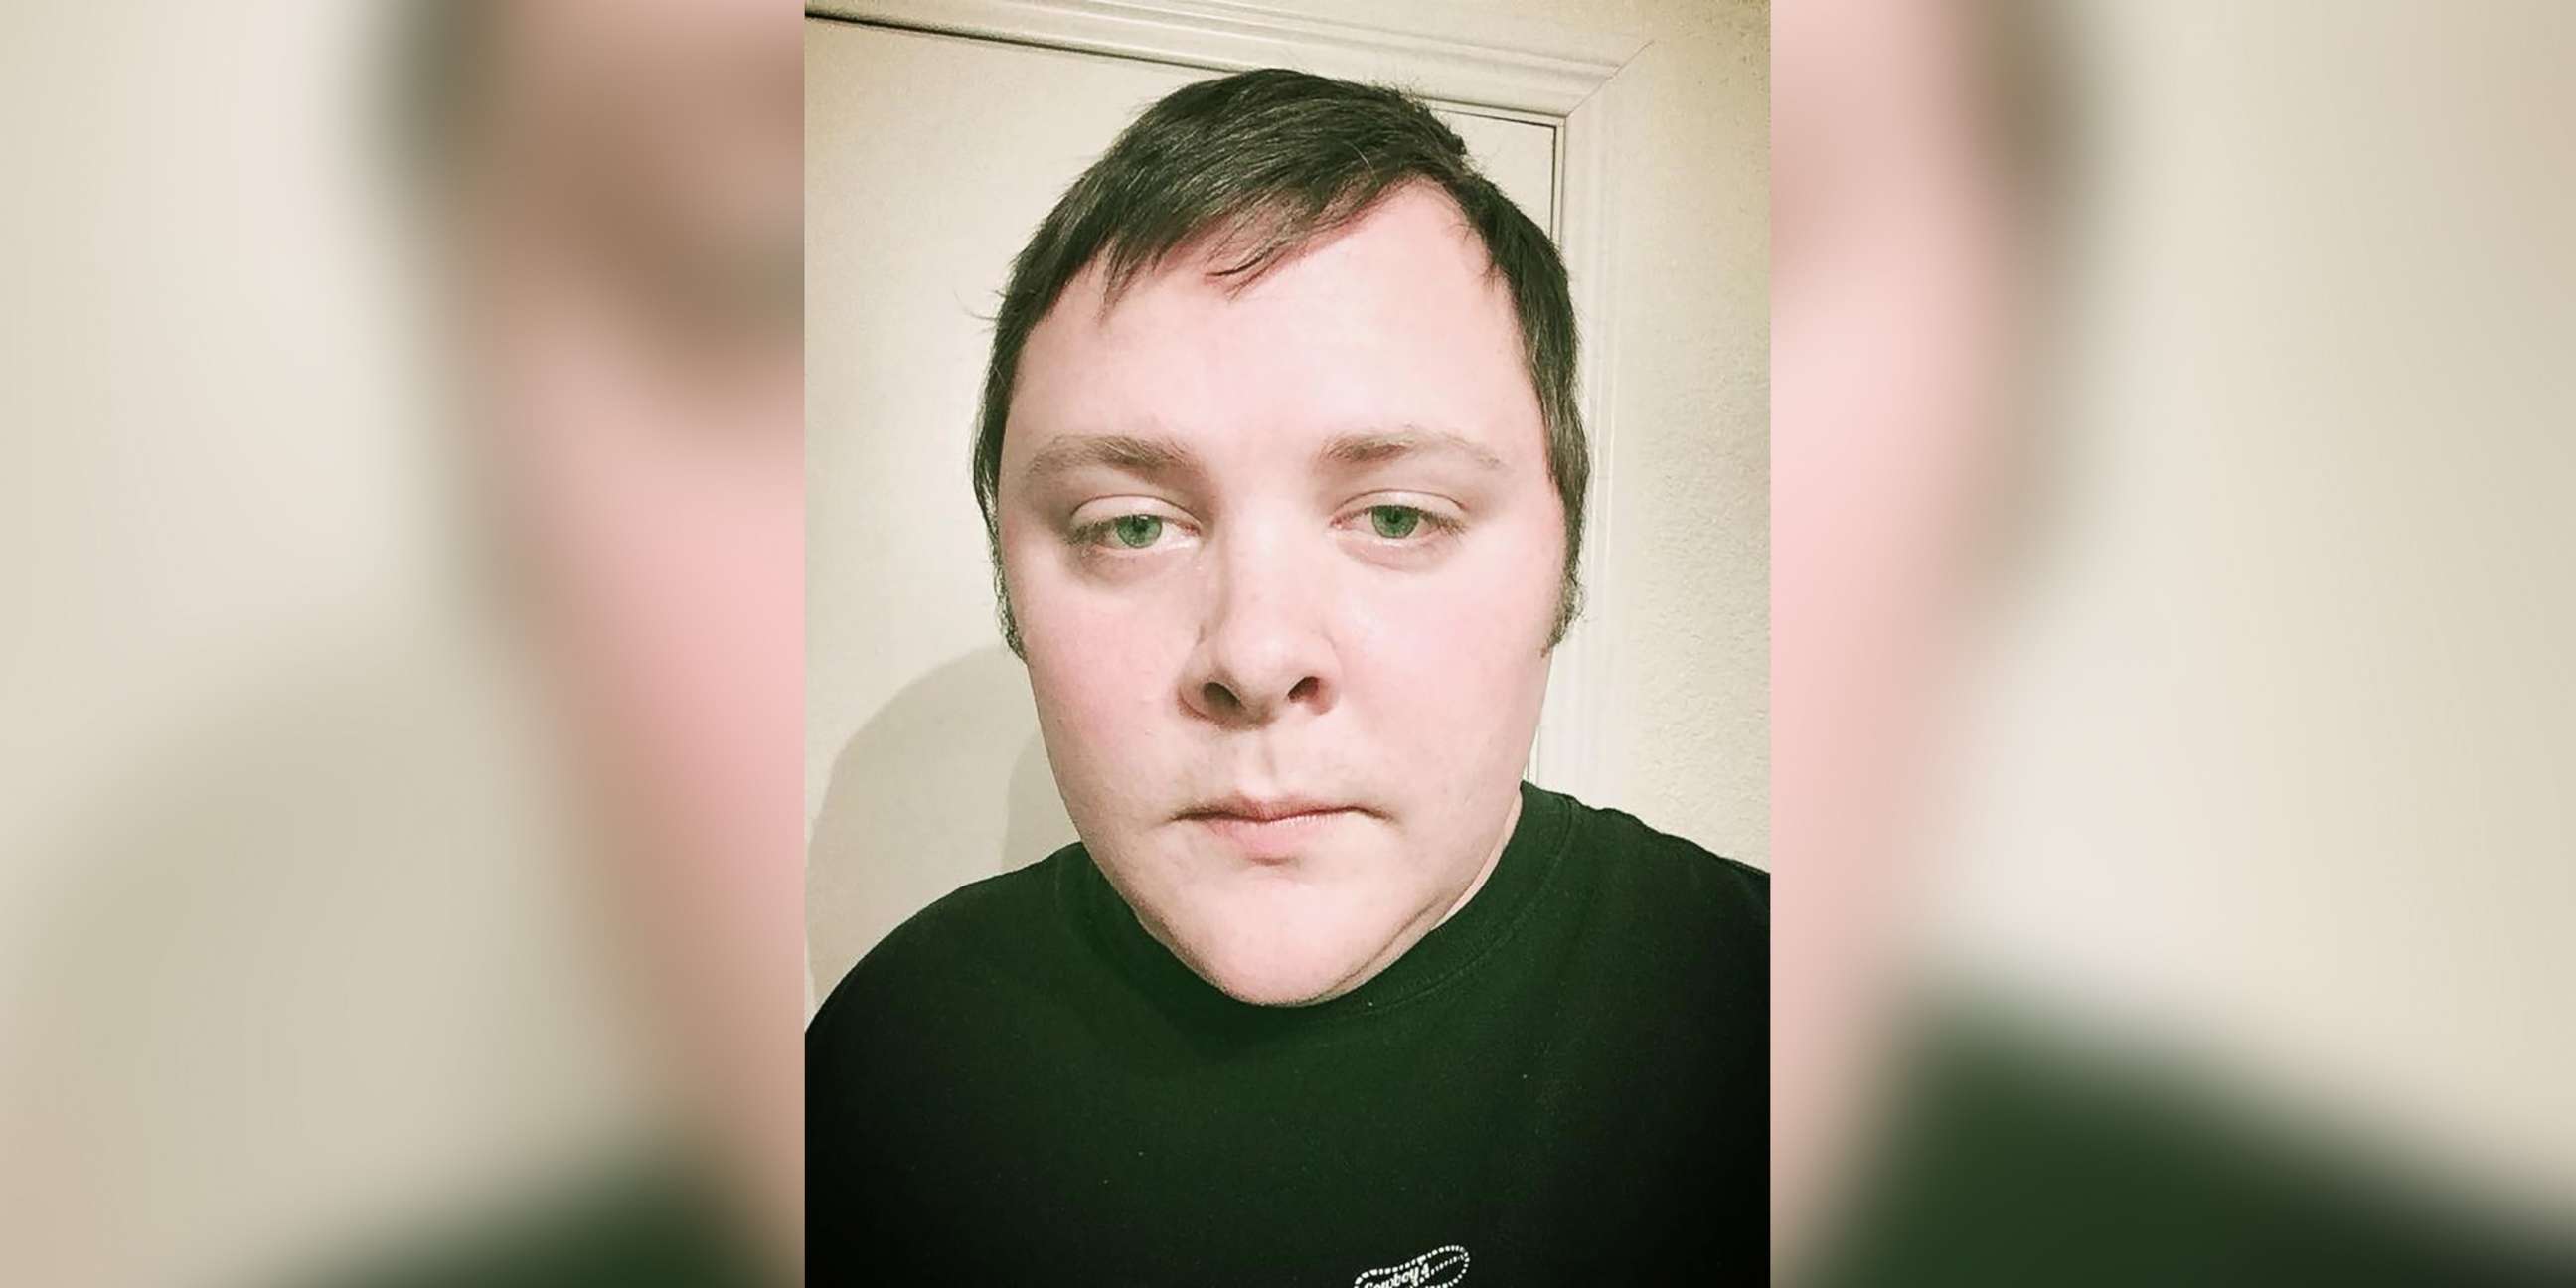 PHOTO: Devin Kelley, 26, identified as the suspected shooter who opened fire in the First Baptist Church of Sutherland Springs, Texas, is pictured in an undated Facebook photo.